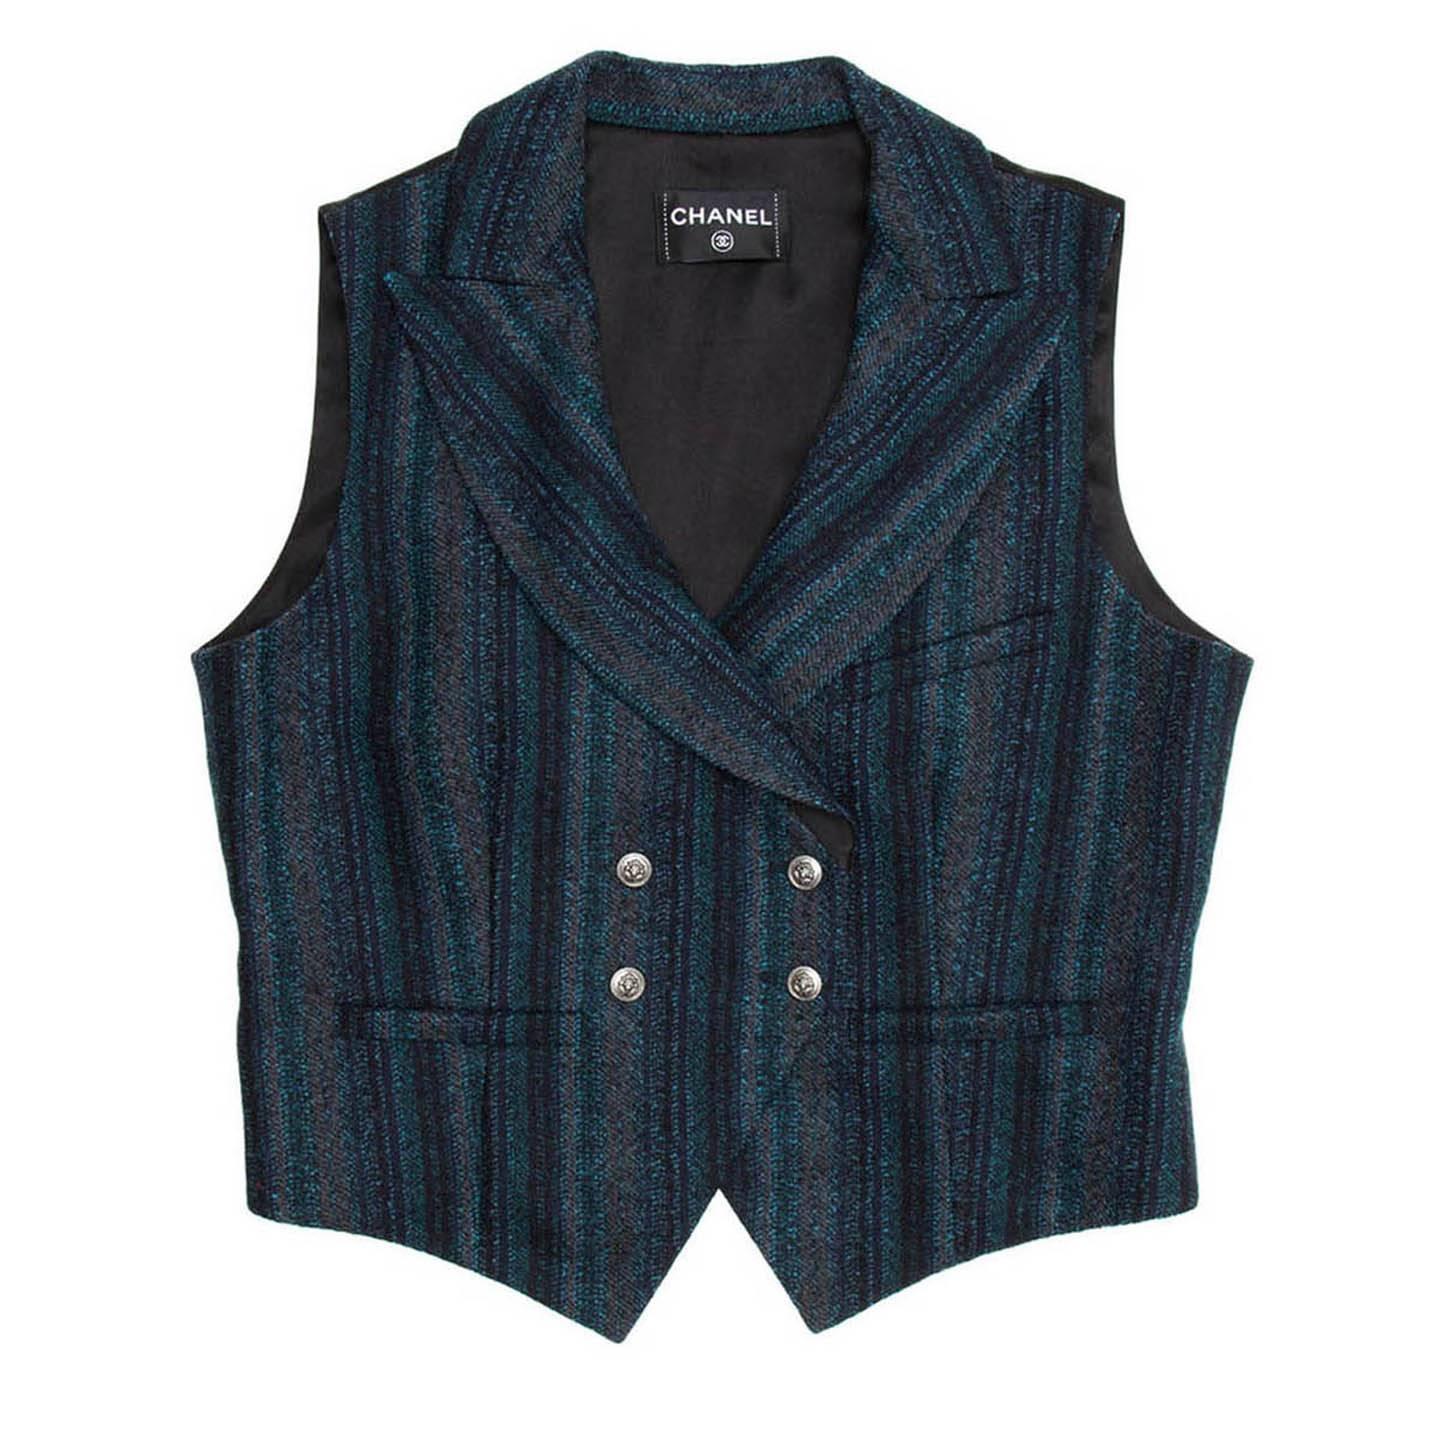 08A Collection: Woven wool black, teal, & grey striped double breasted fitted suit vest.

Size  44 French sizing

Condition  Pristine and Excellent